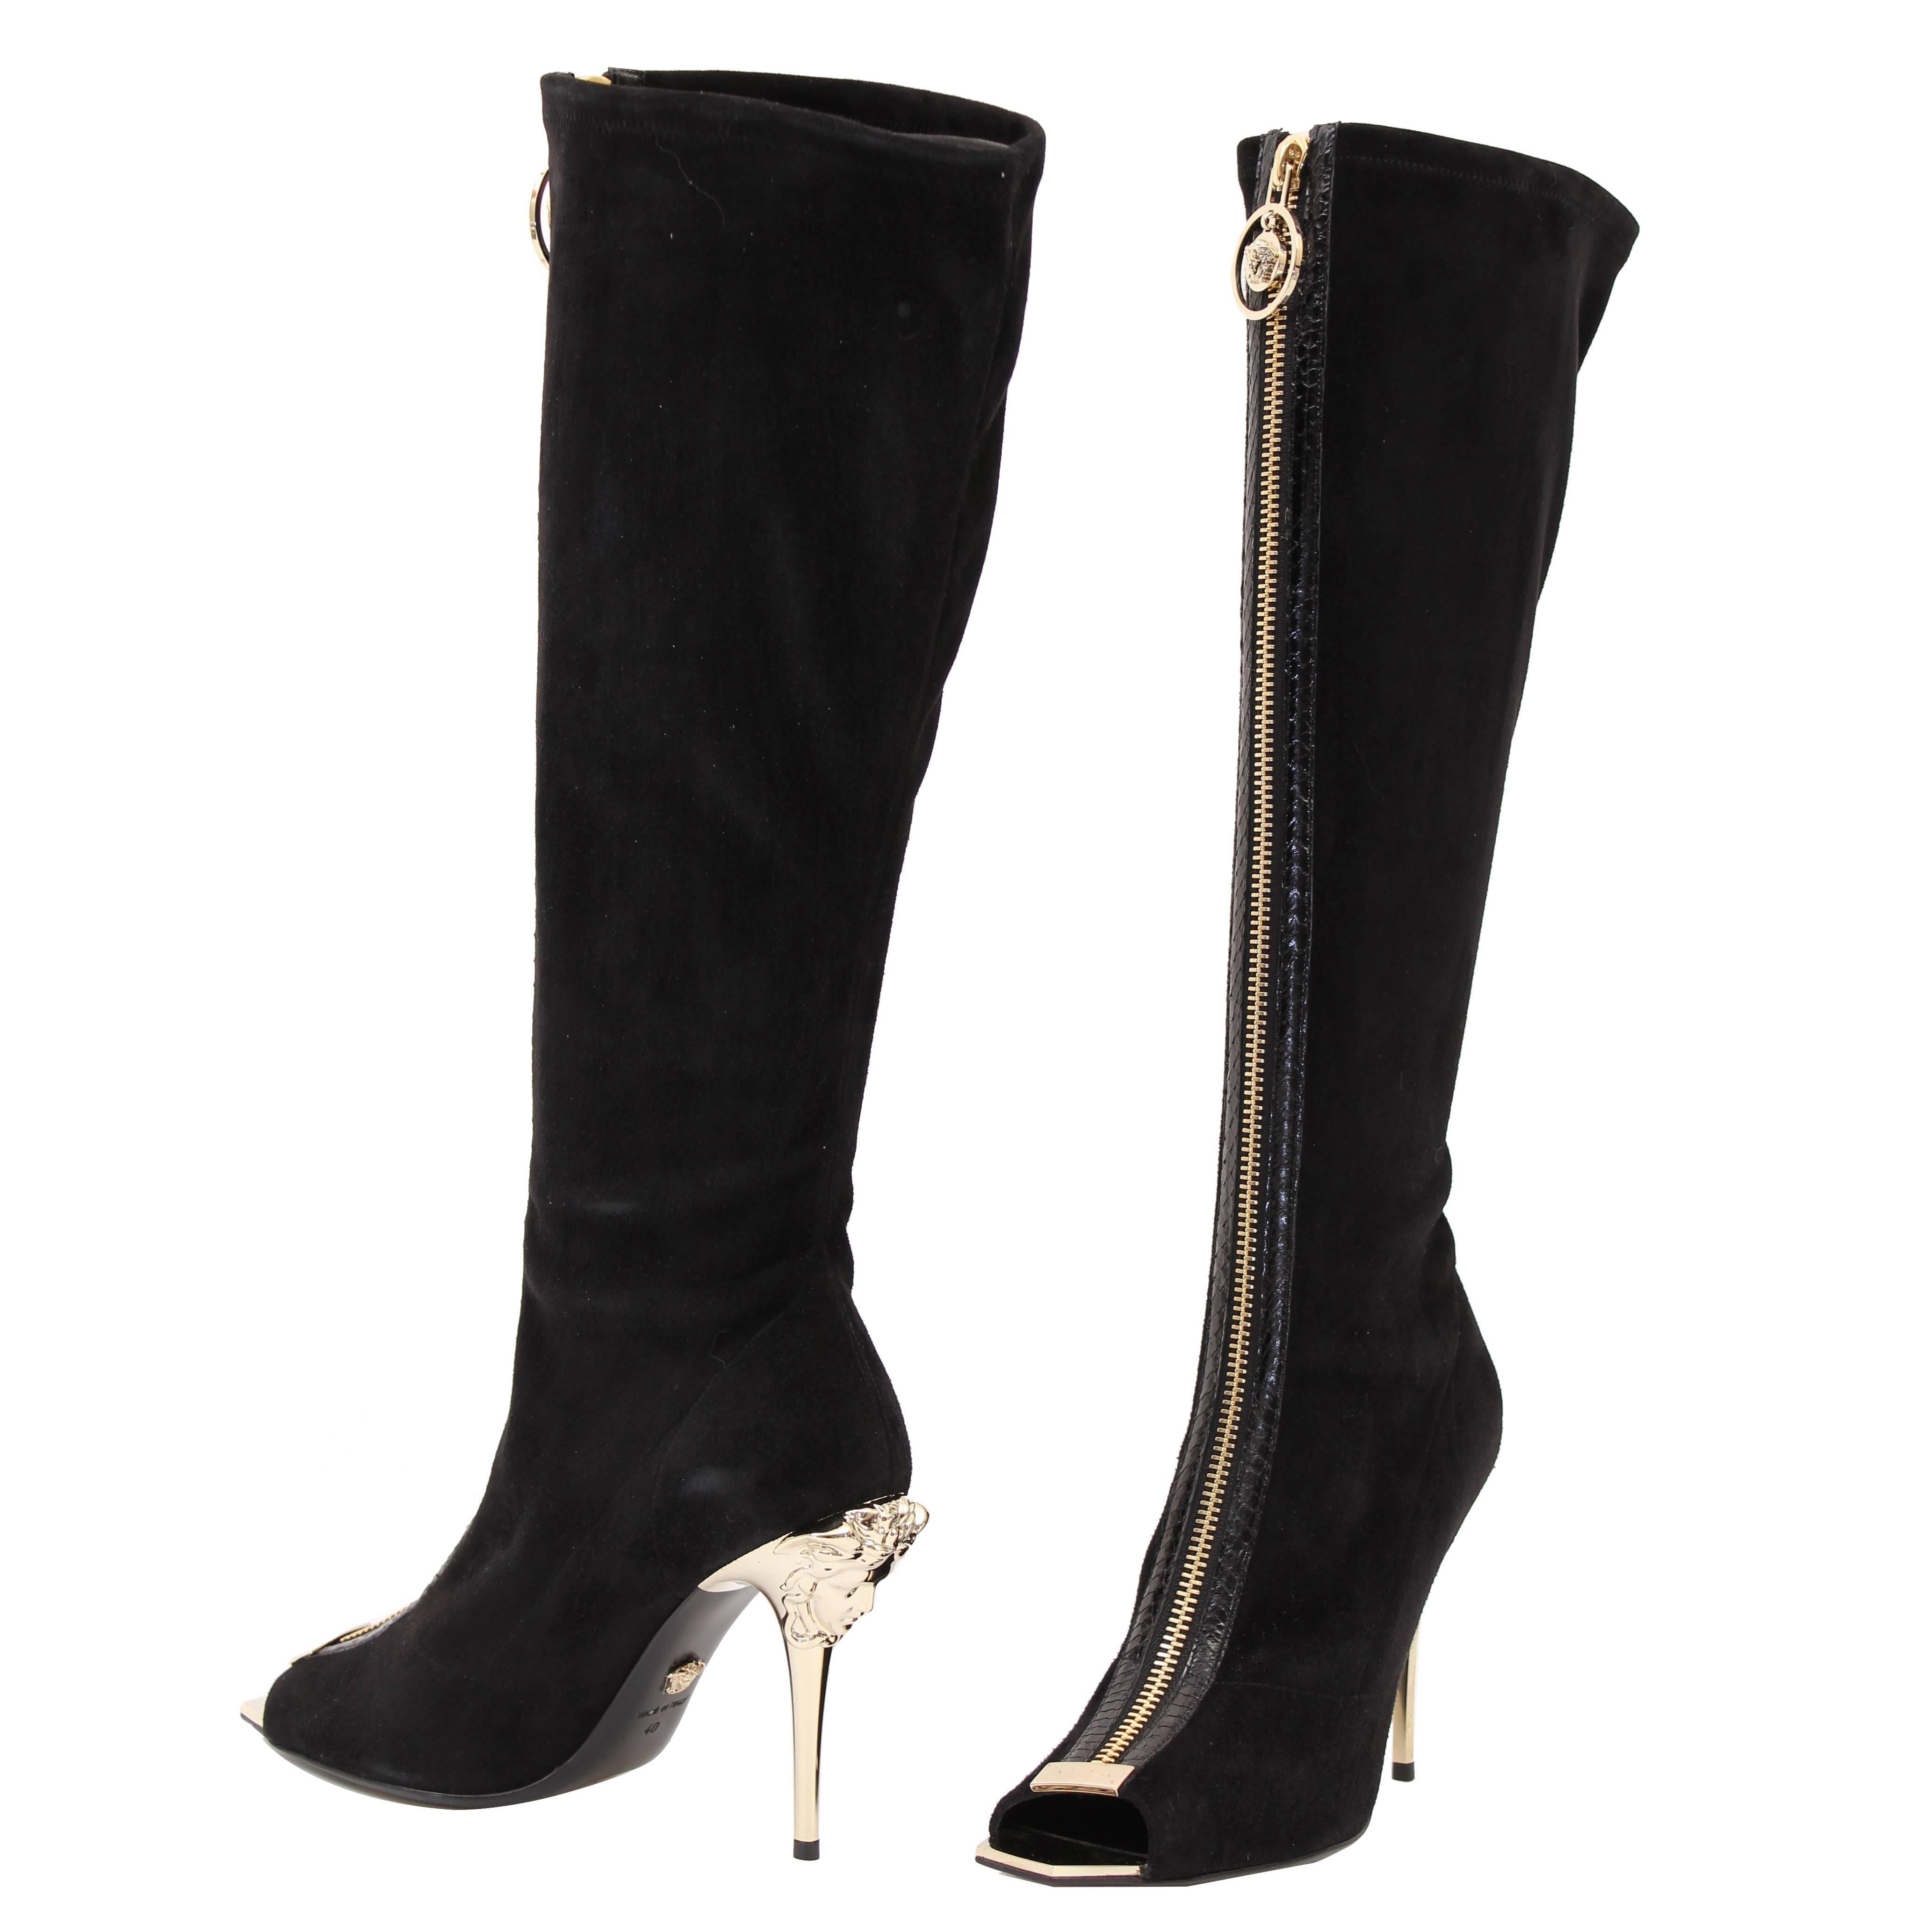 New VERSACE Knee High Black Suede Boots with gold Medusa heel and open toe